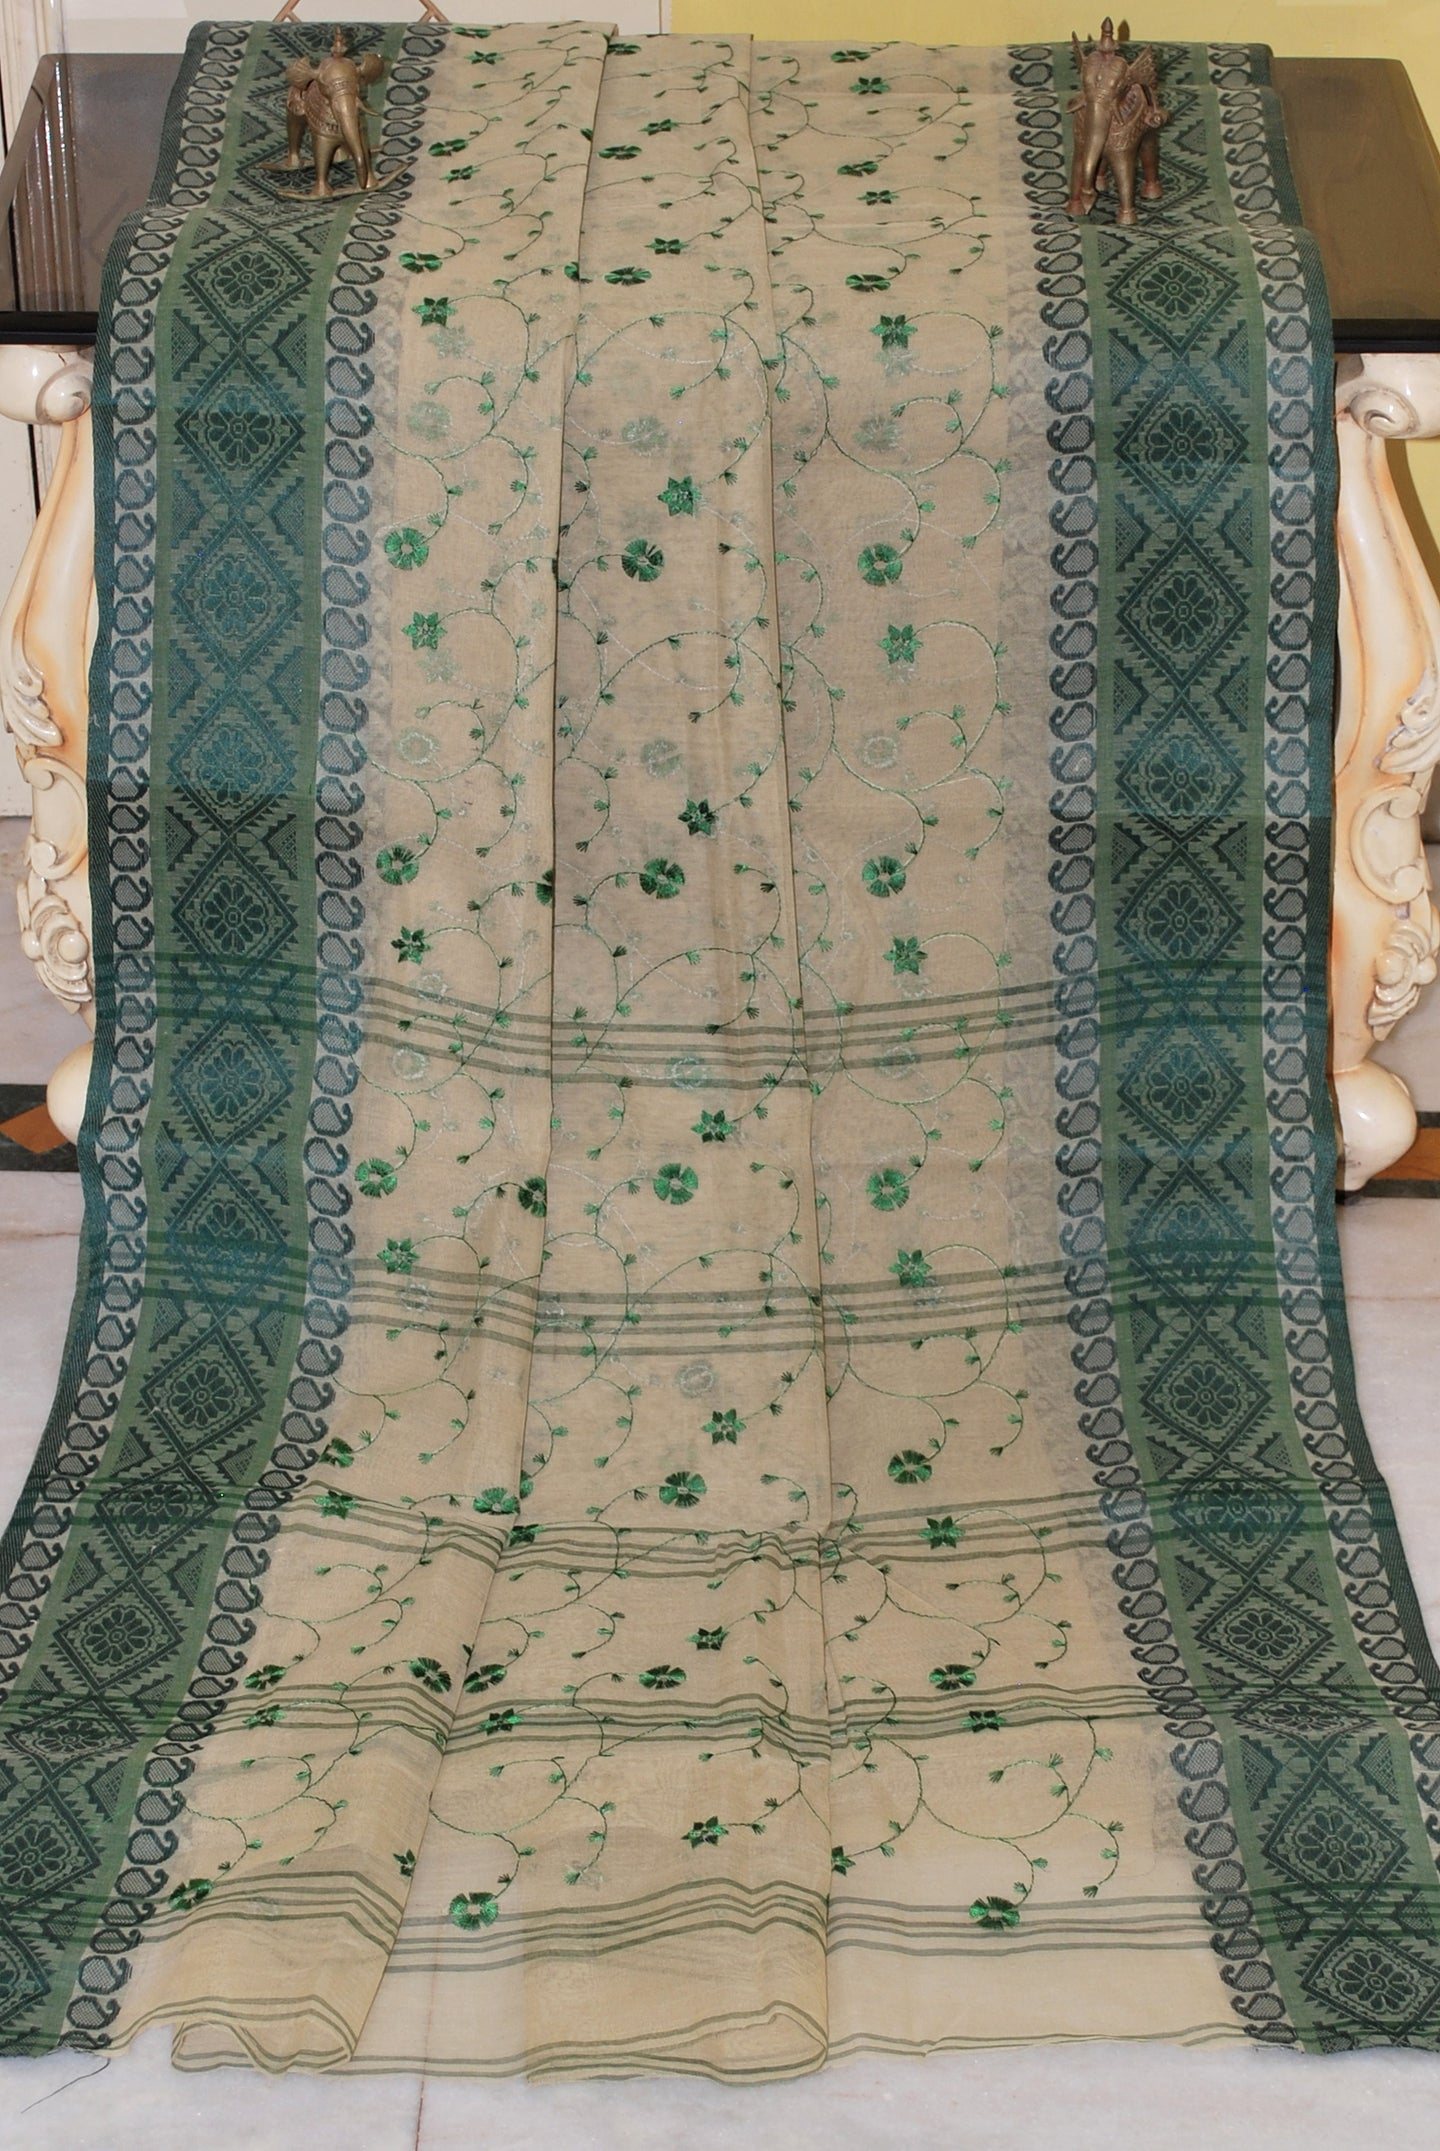 Bengal Handloom Cotton Saree with Floral Jaal Embroidery Work in Mojave Desert and Sacramento Green